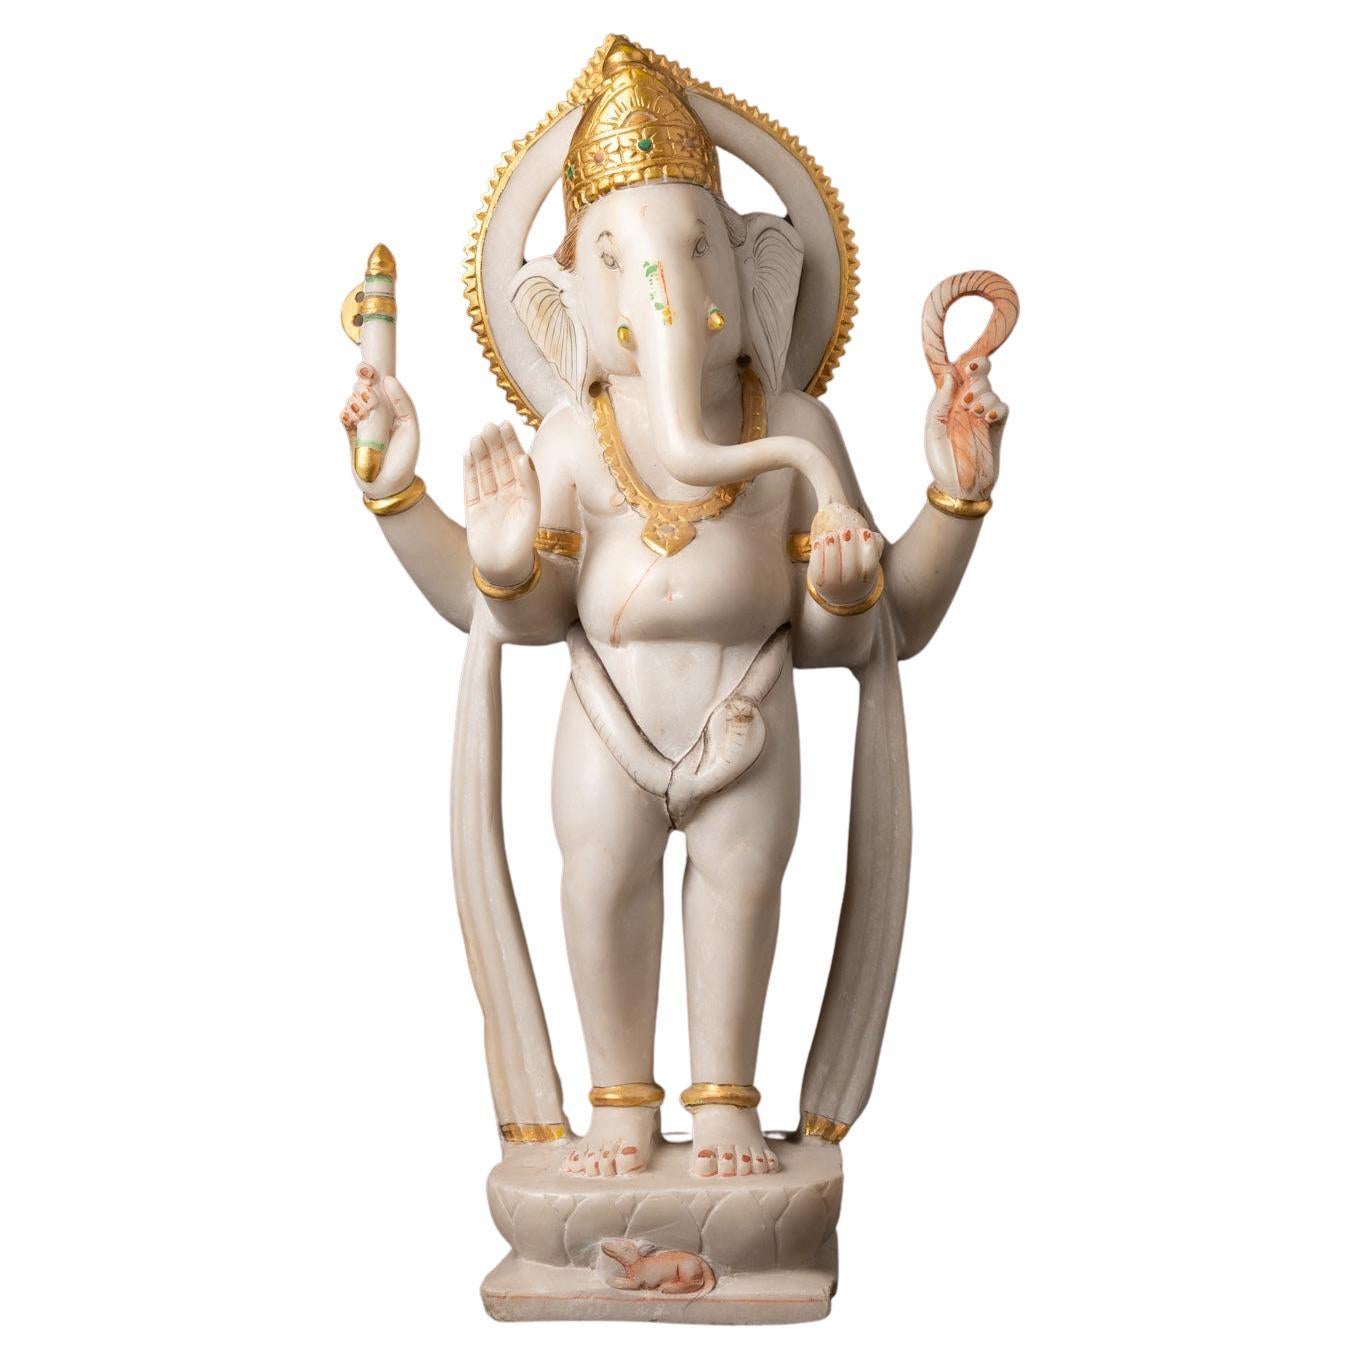 Middle 20th century Beautiful old marble Ganesha from India